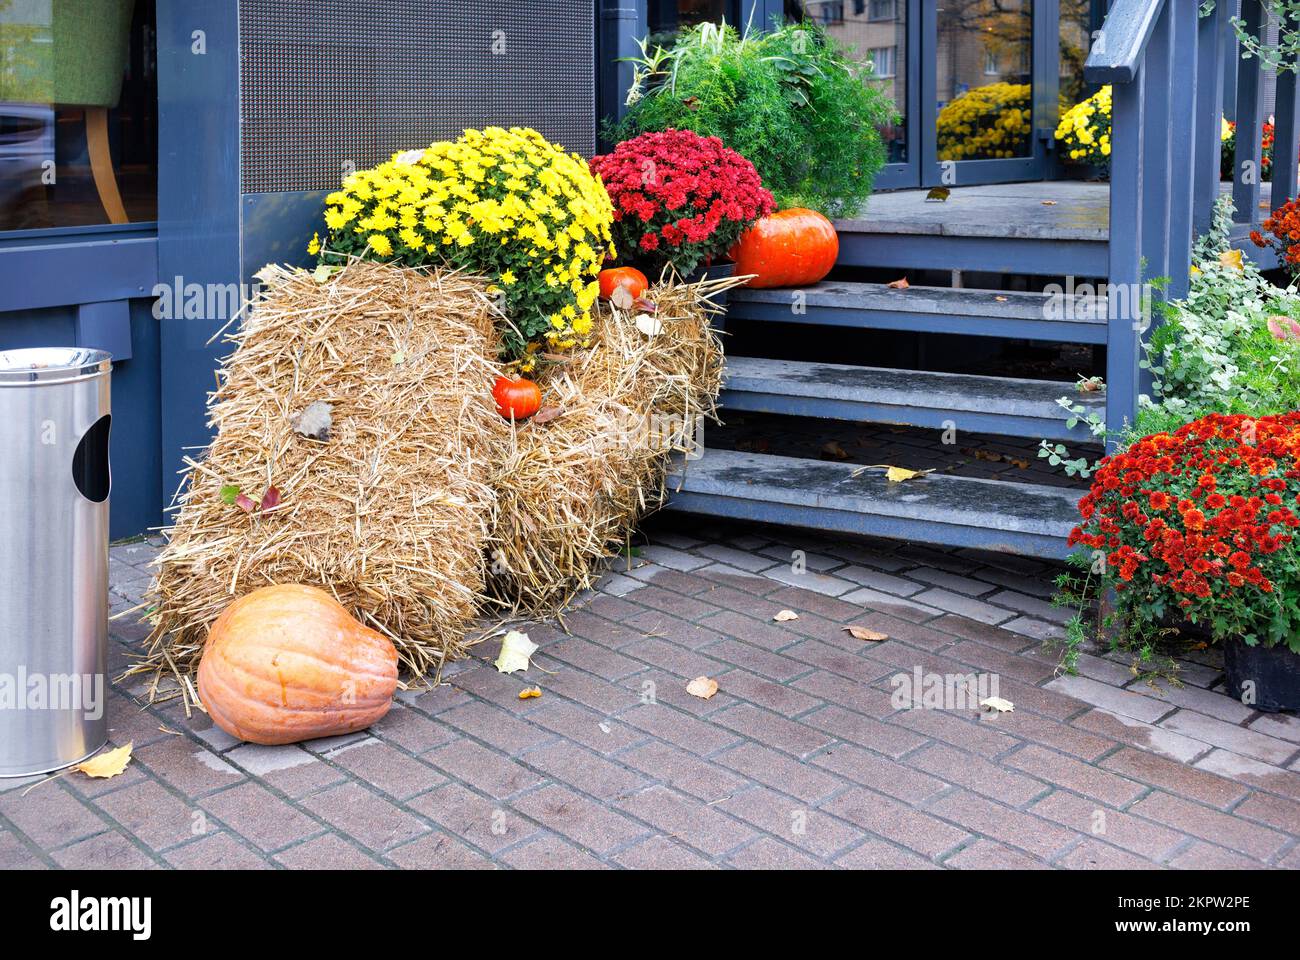 Bouquets of bright autumn colors of yellow, red and orange chrysanthemums adorn the cafe's black wooden entrance steps along with straw and pumpkins. Stock Photo